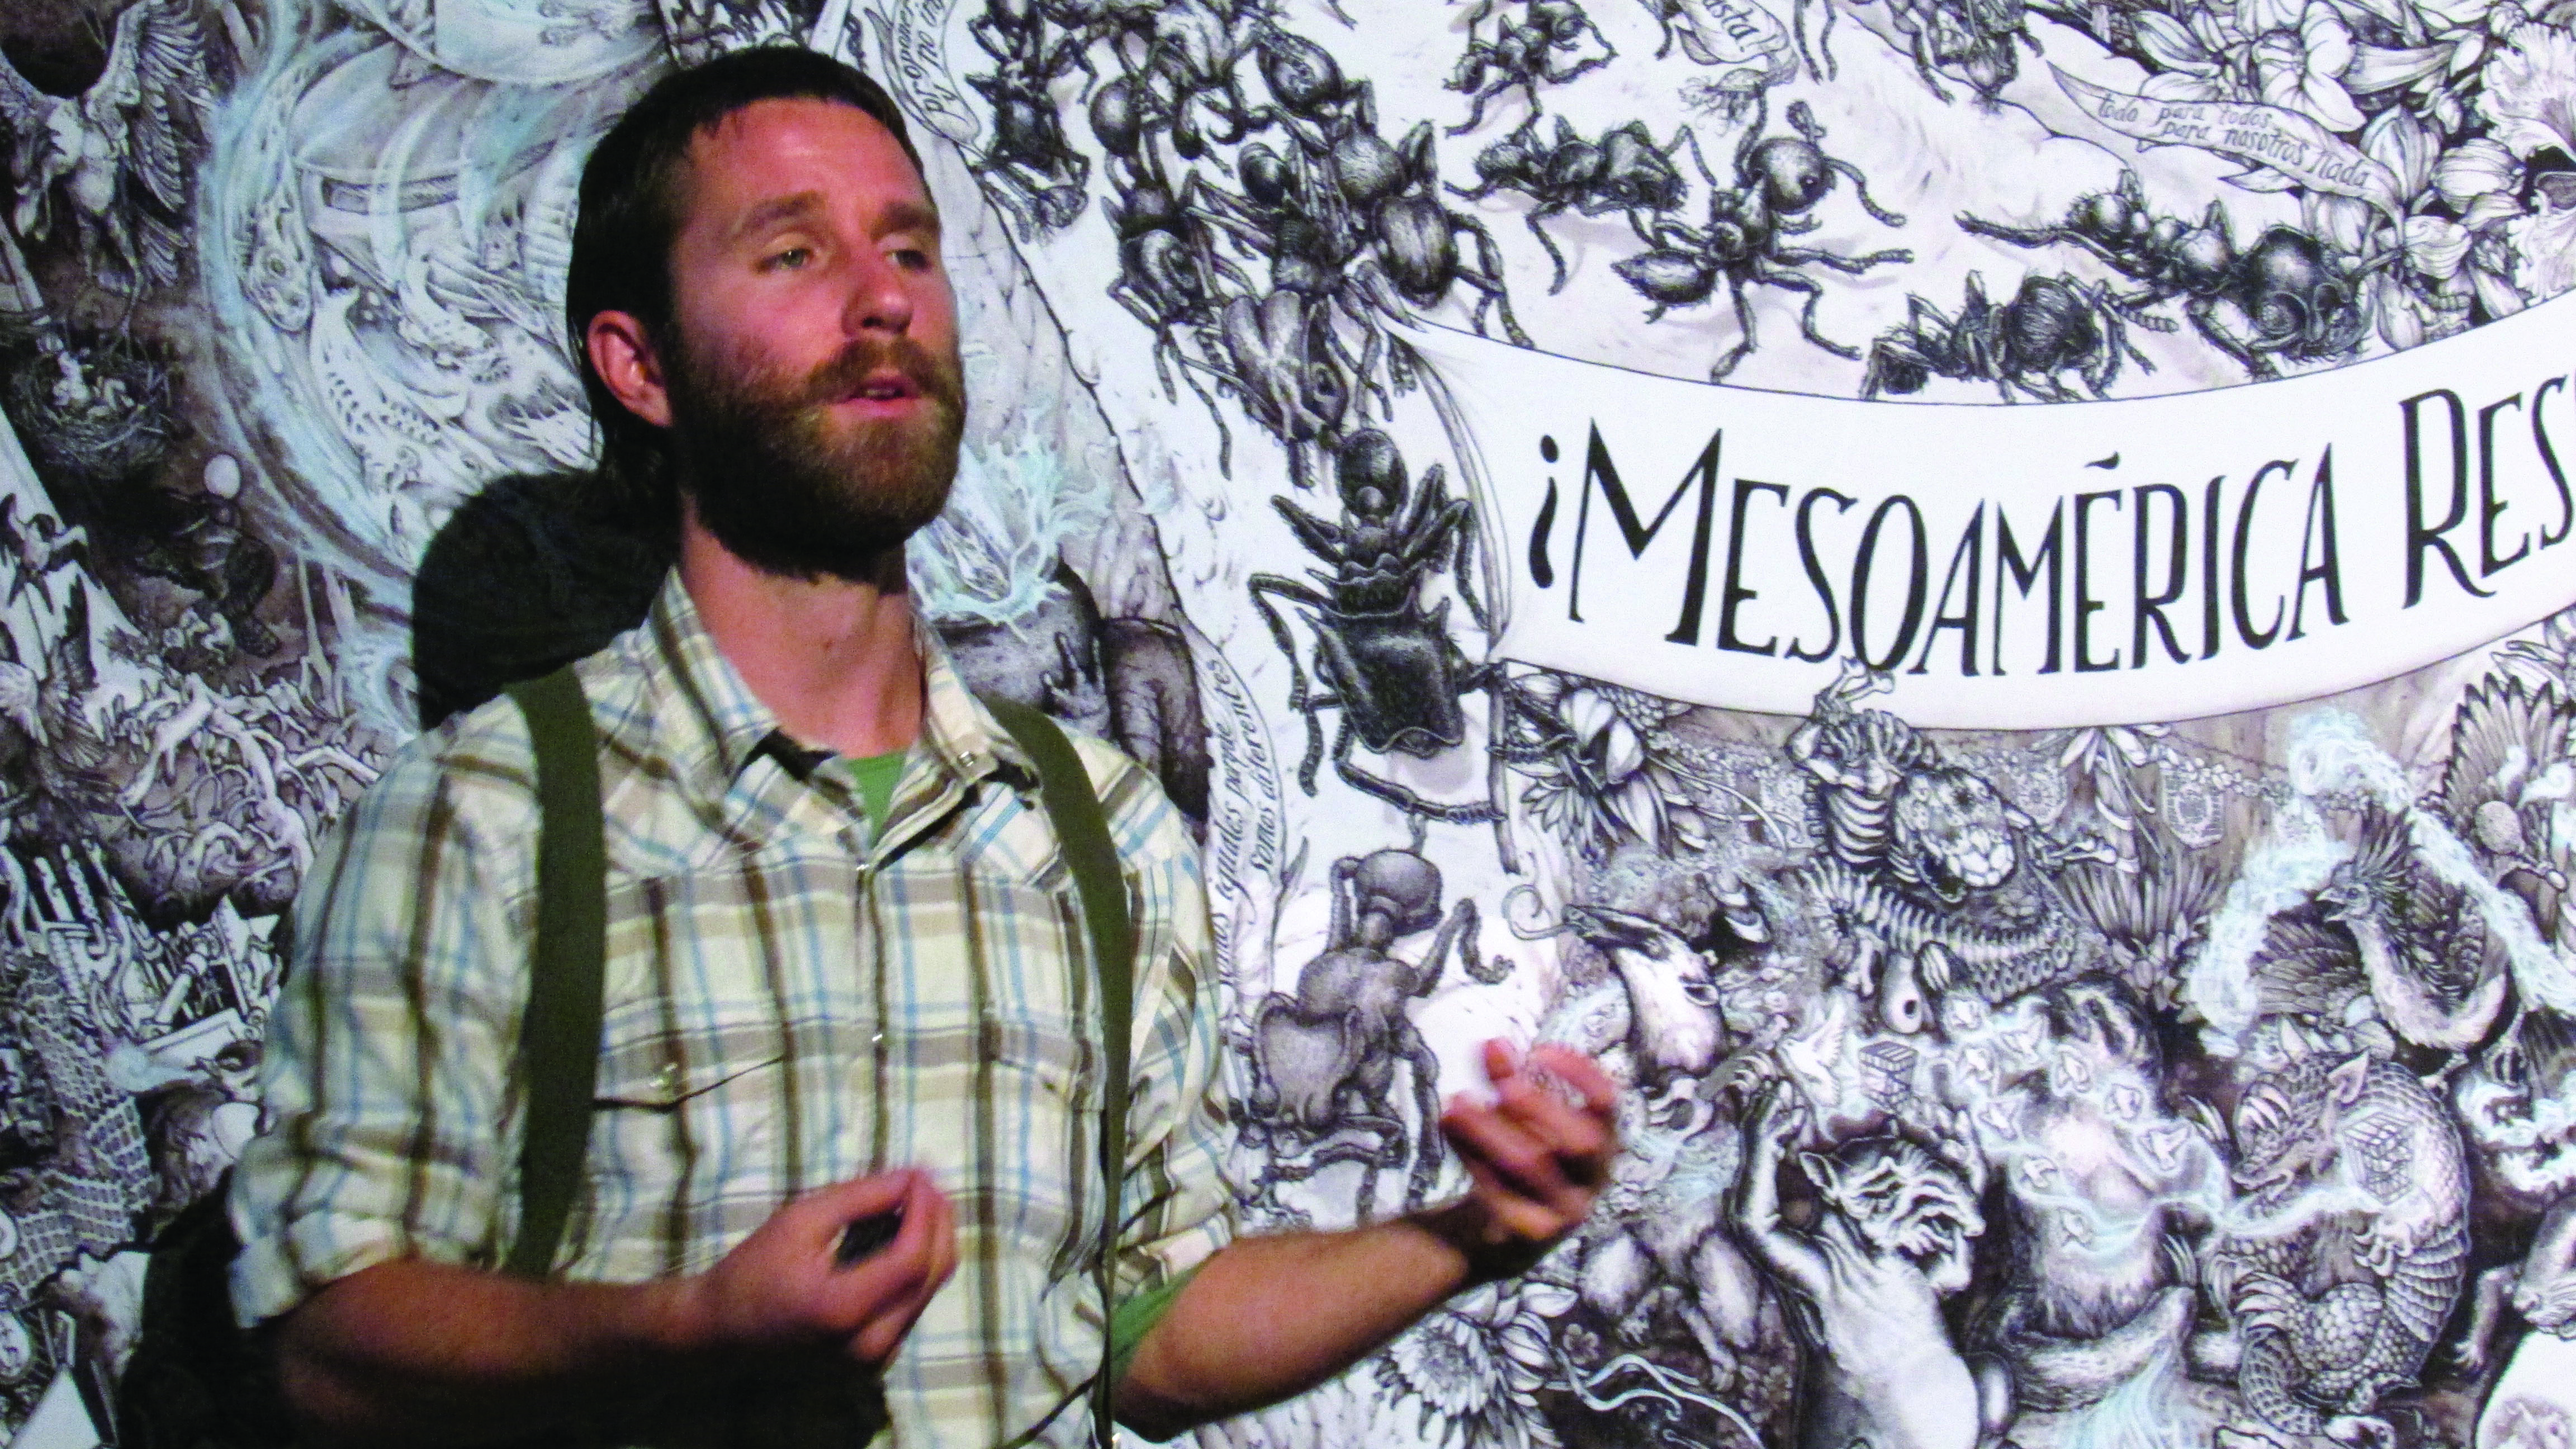 Beehive Collective member Kyle Gibson explains the group's newest poster. Photo by Cory A. Thompson - staff writer